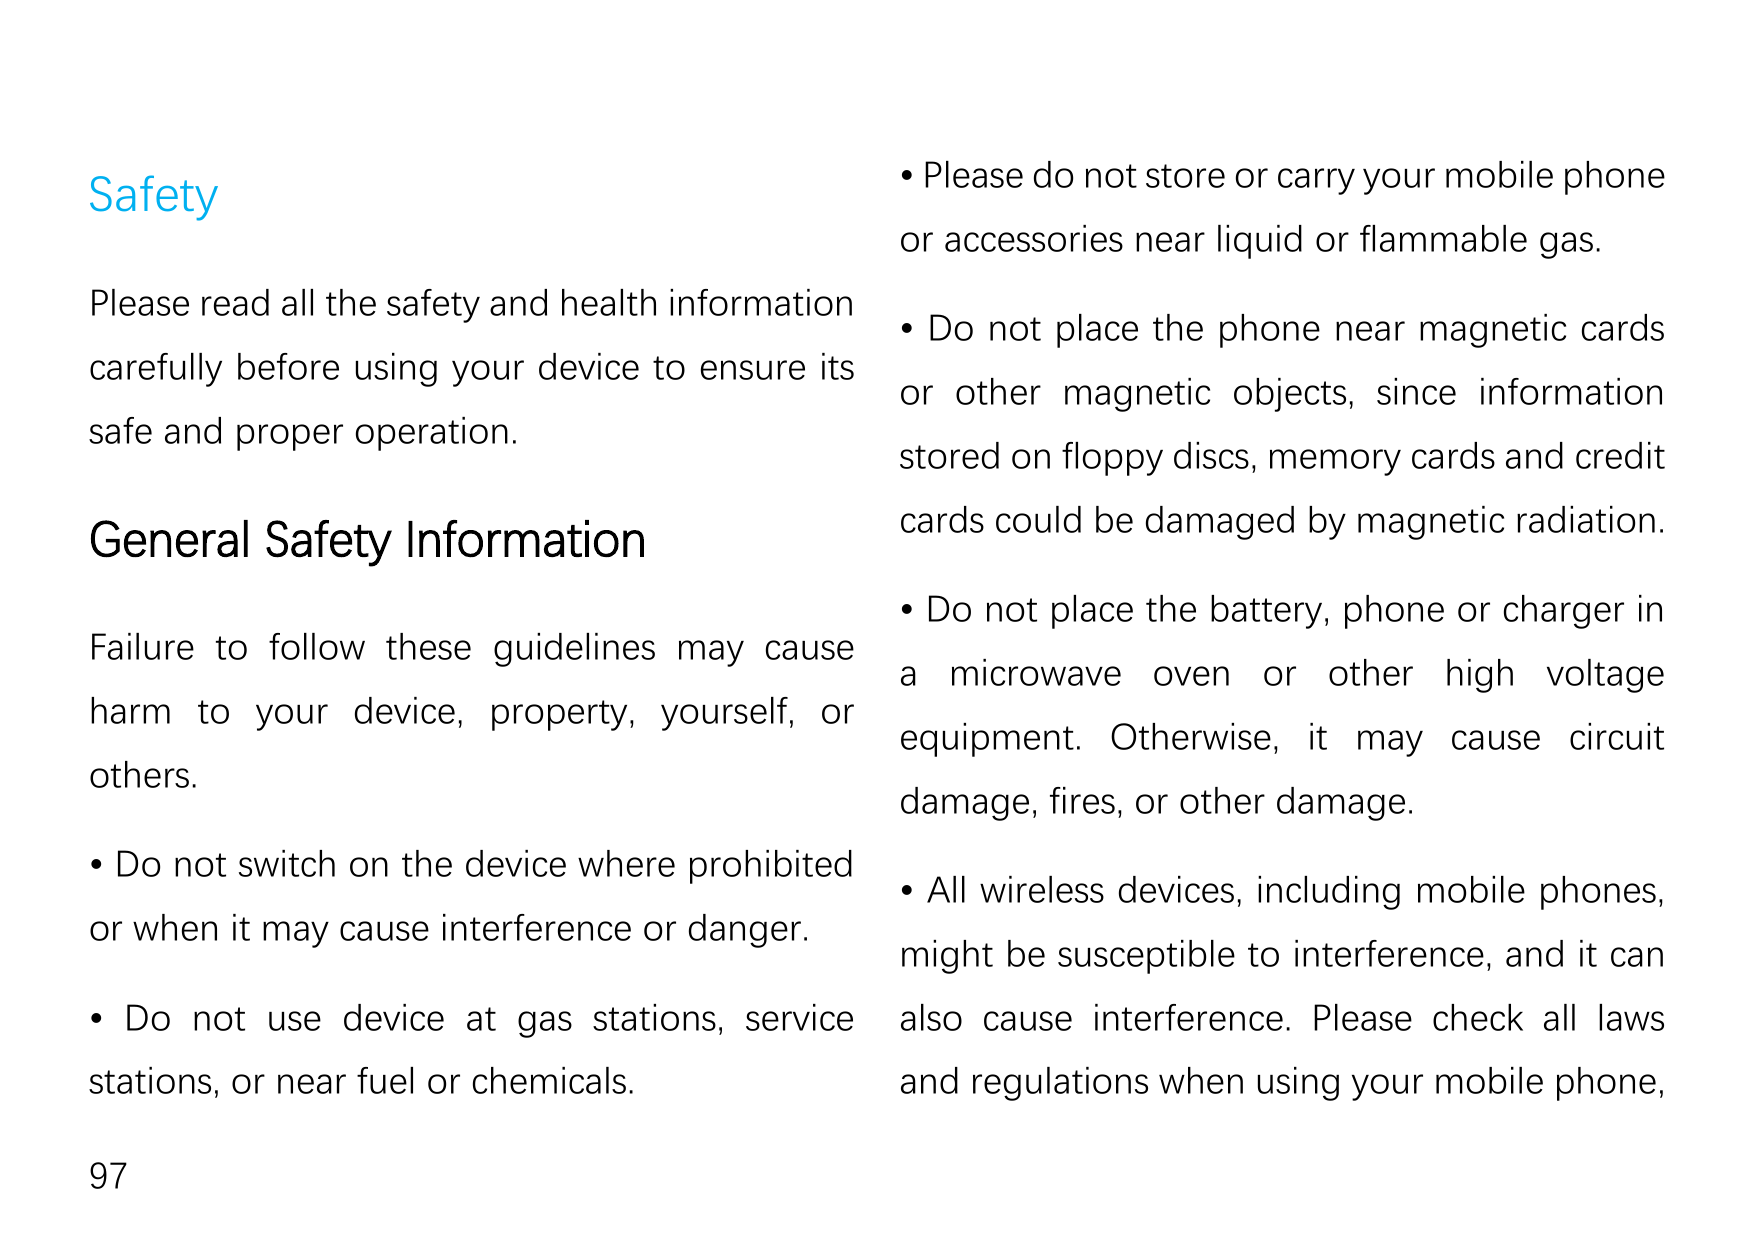 SafetyPlease read all the safety and health informationcarefully before using your device to ensure itssafe and proper operation